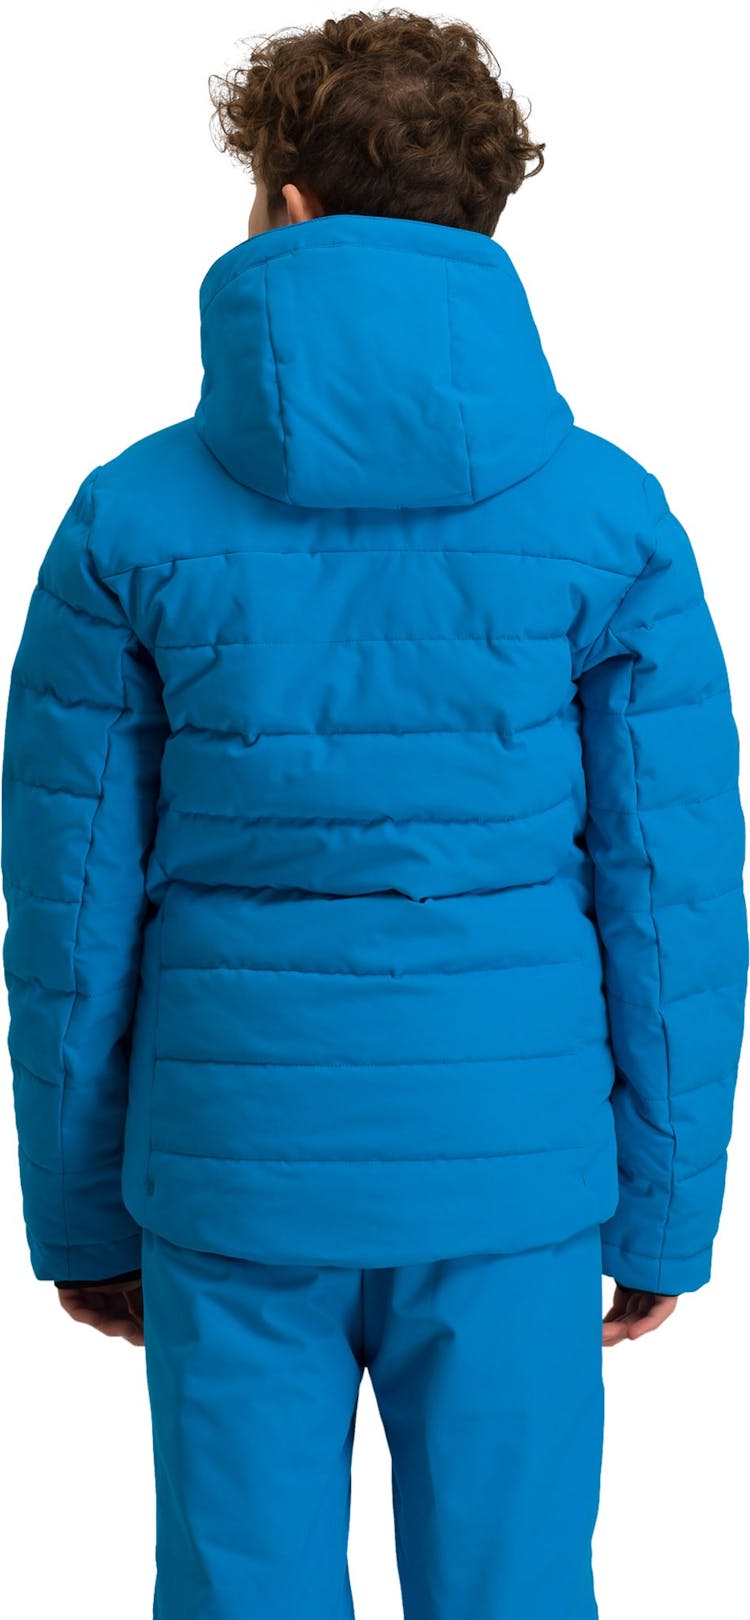 Rossignol Hiver Polydown Jacket - Boys | The Last Hunt